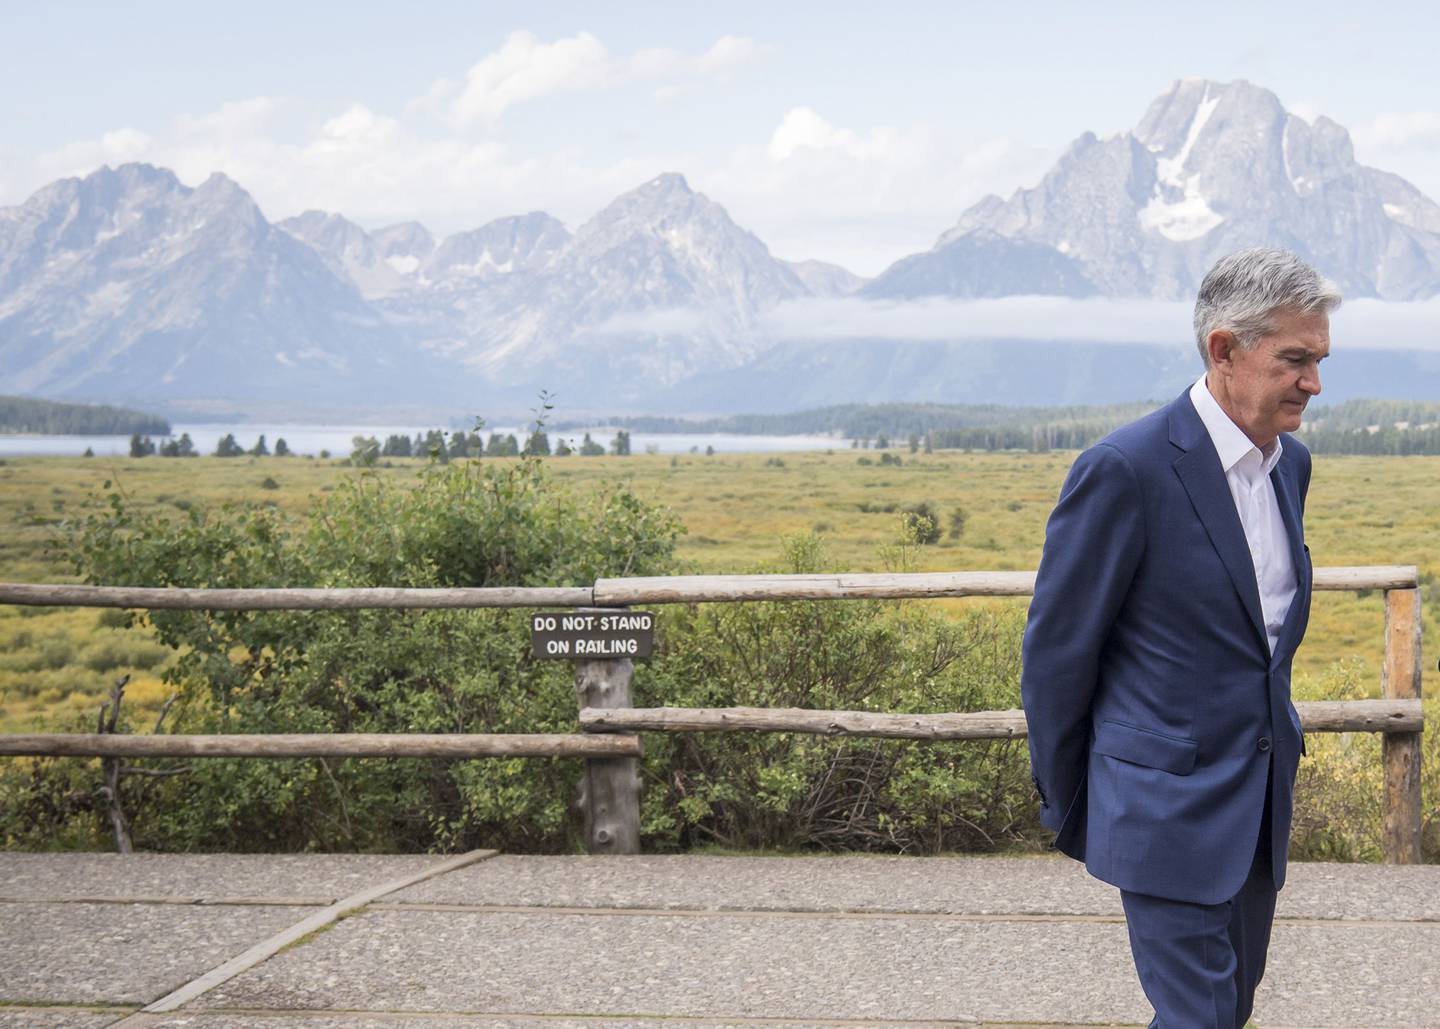 Federal Reserve Chairman Jerome Powell in Jackson Hole, Wyoming